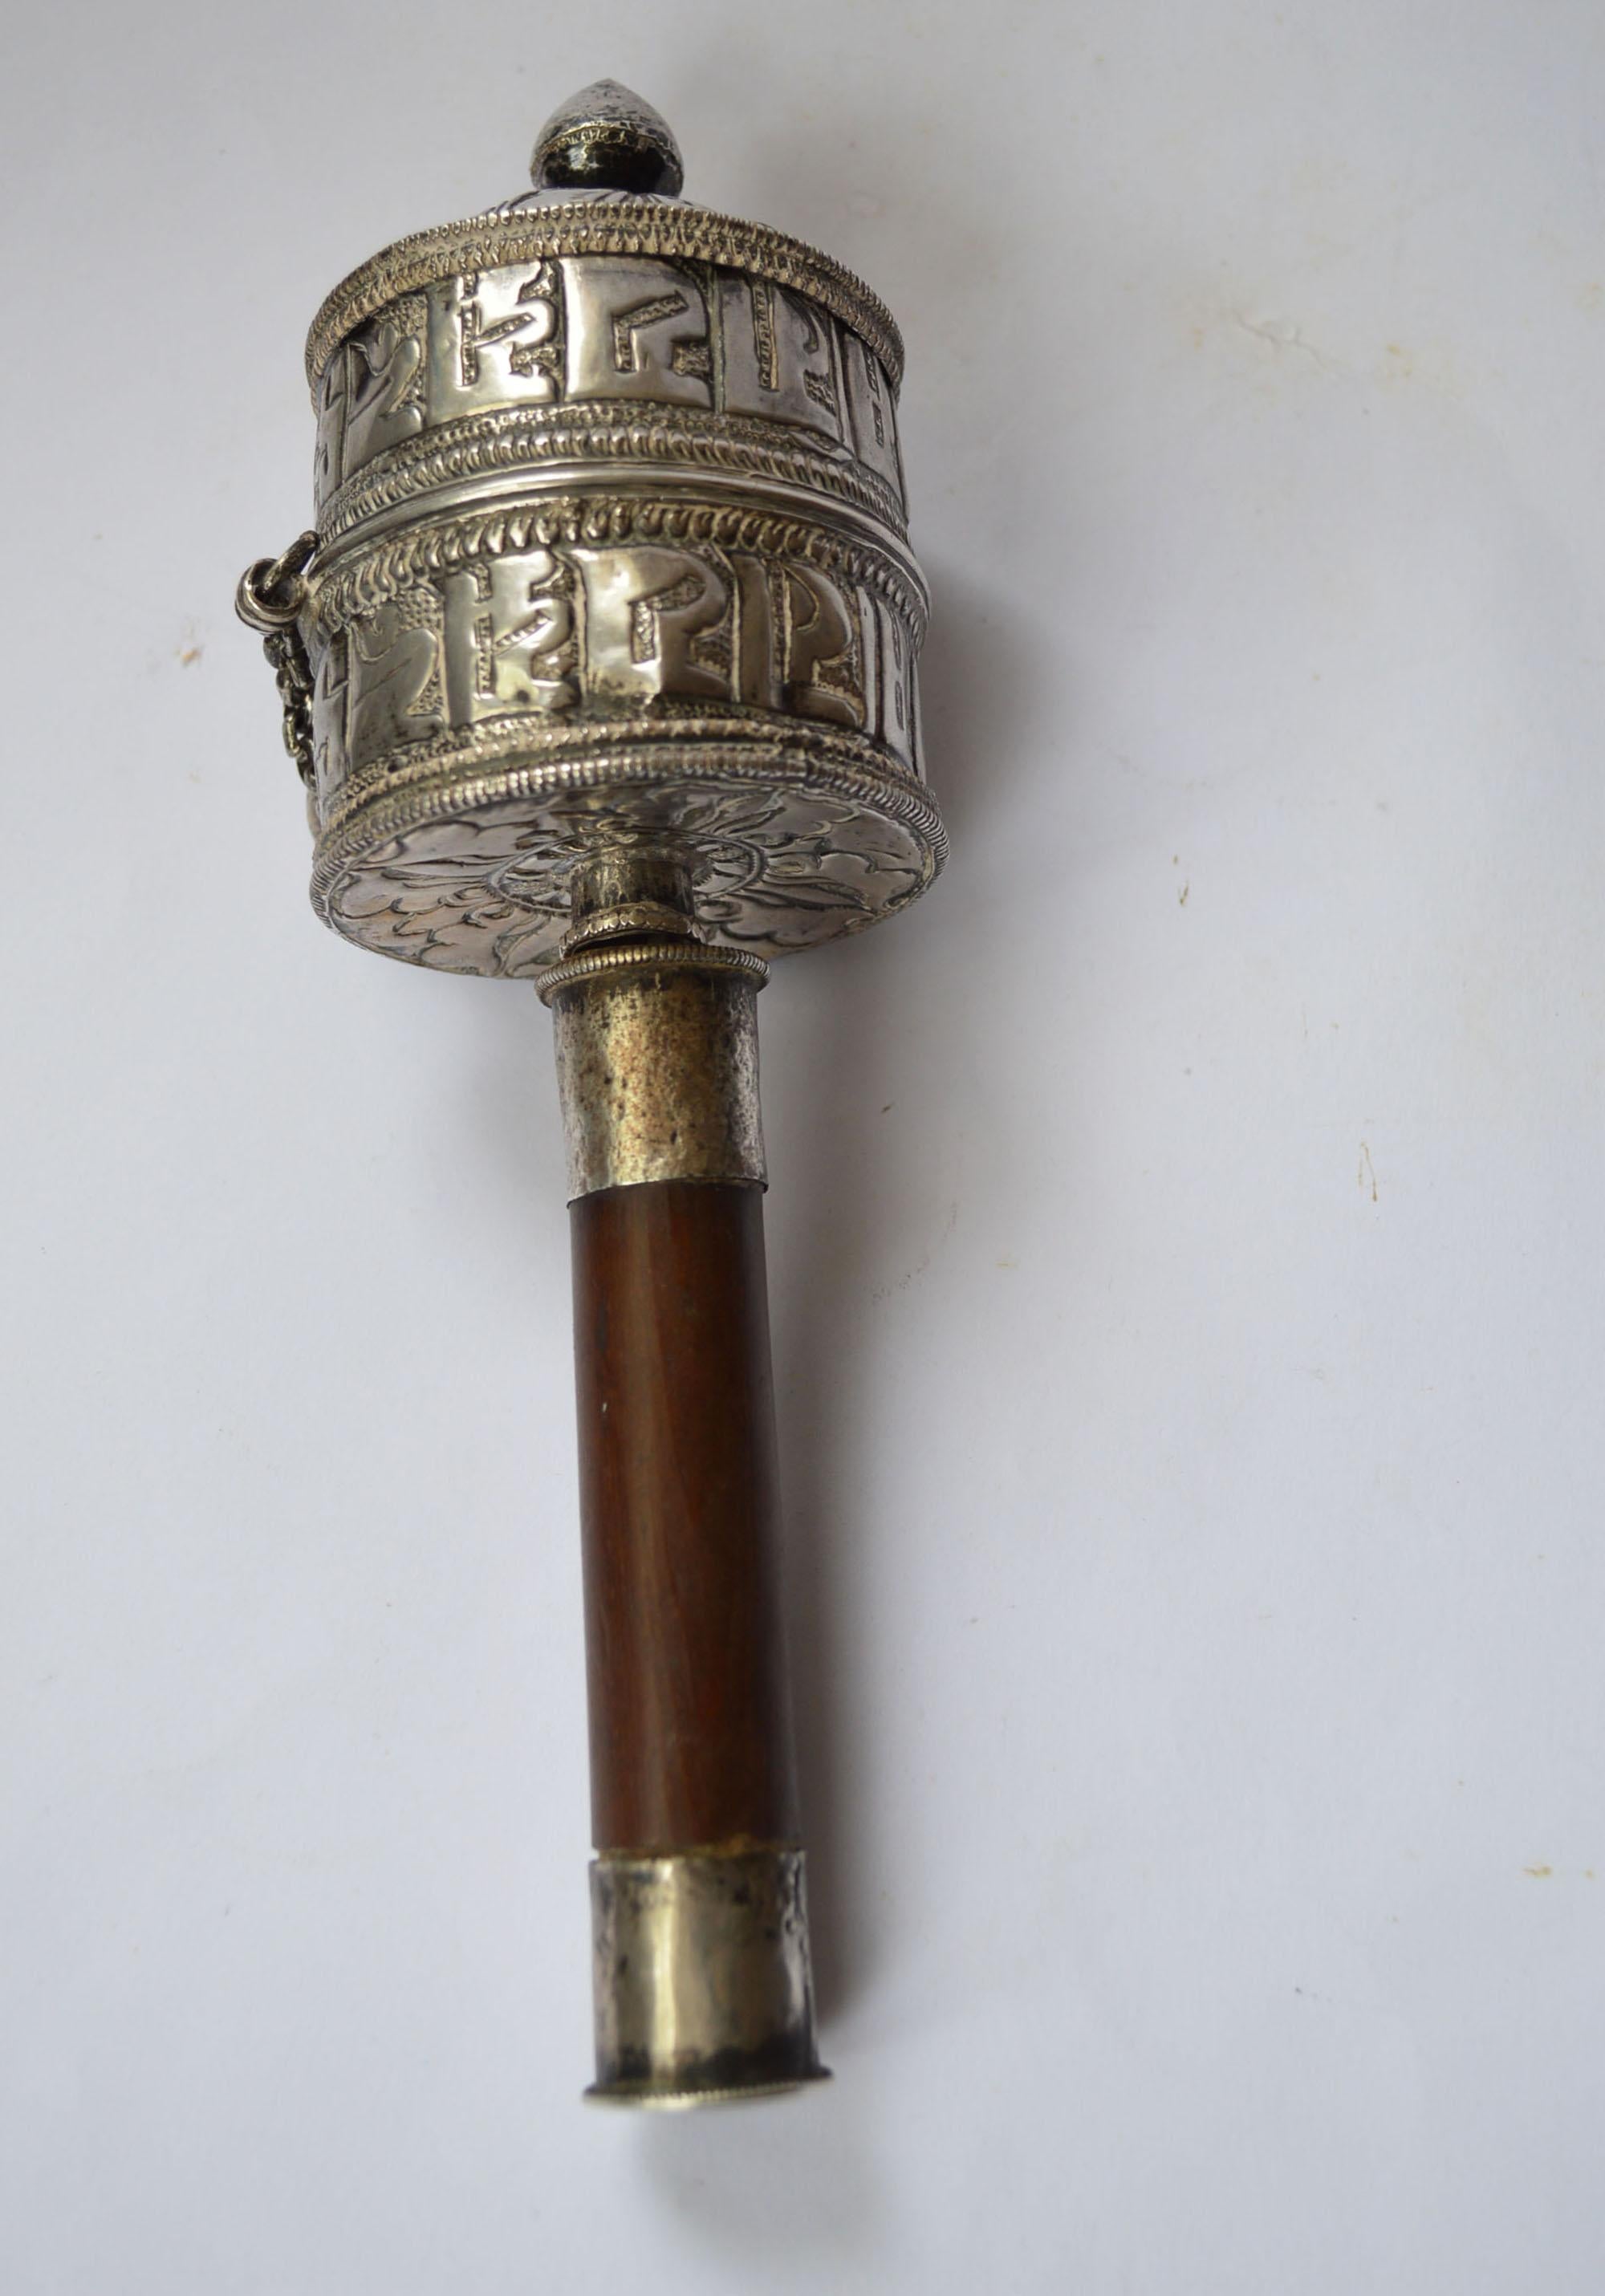 Fine Antique Tibetan Ritual Silver Prayer wheel
Wood handle with hammered and chased design silver in Tibetan script, 
complete with prayer scroll inside the cylinder on parchment paper scroll with Buddhist mantras.
Very finely made in high grade